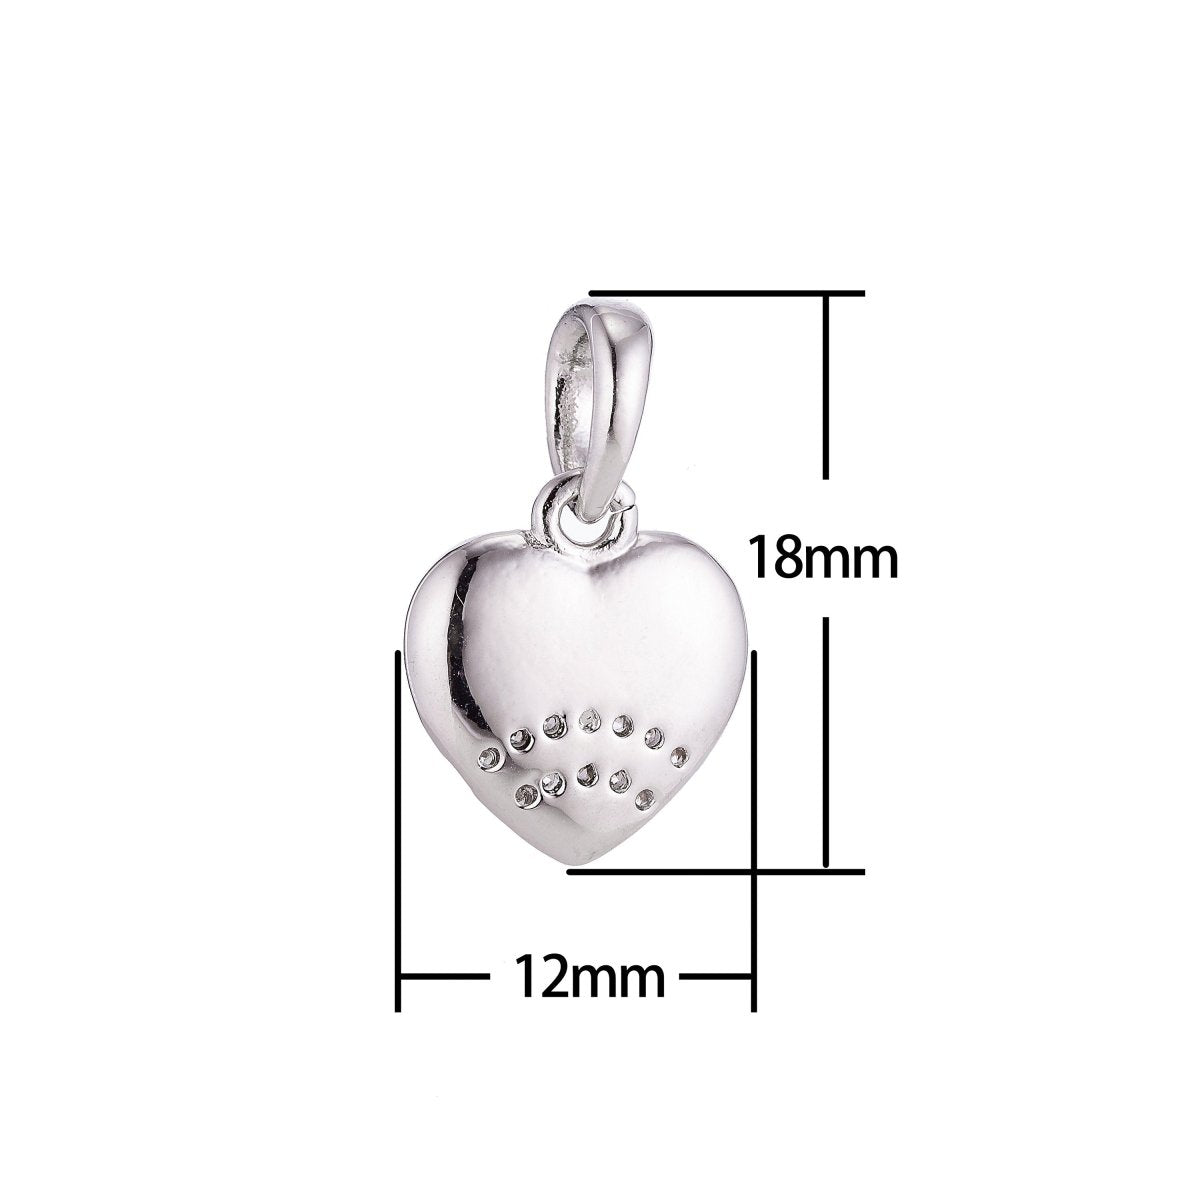 Silver Stainless Steel Cubic Zirconia SImple Lovely Love Heart Charm Pendant Bails Findings for Earring Necklace Jewelry Making Supplies J-401 - DLUXCA